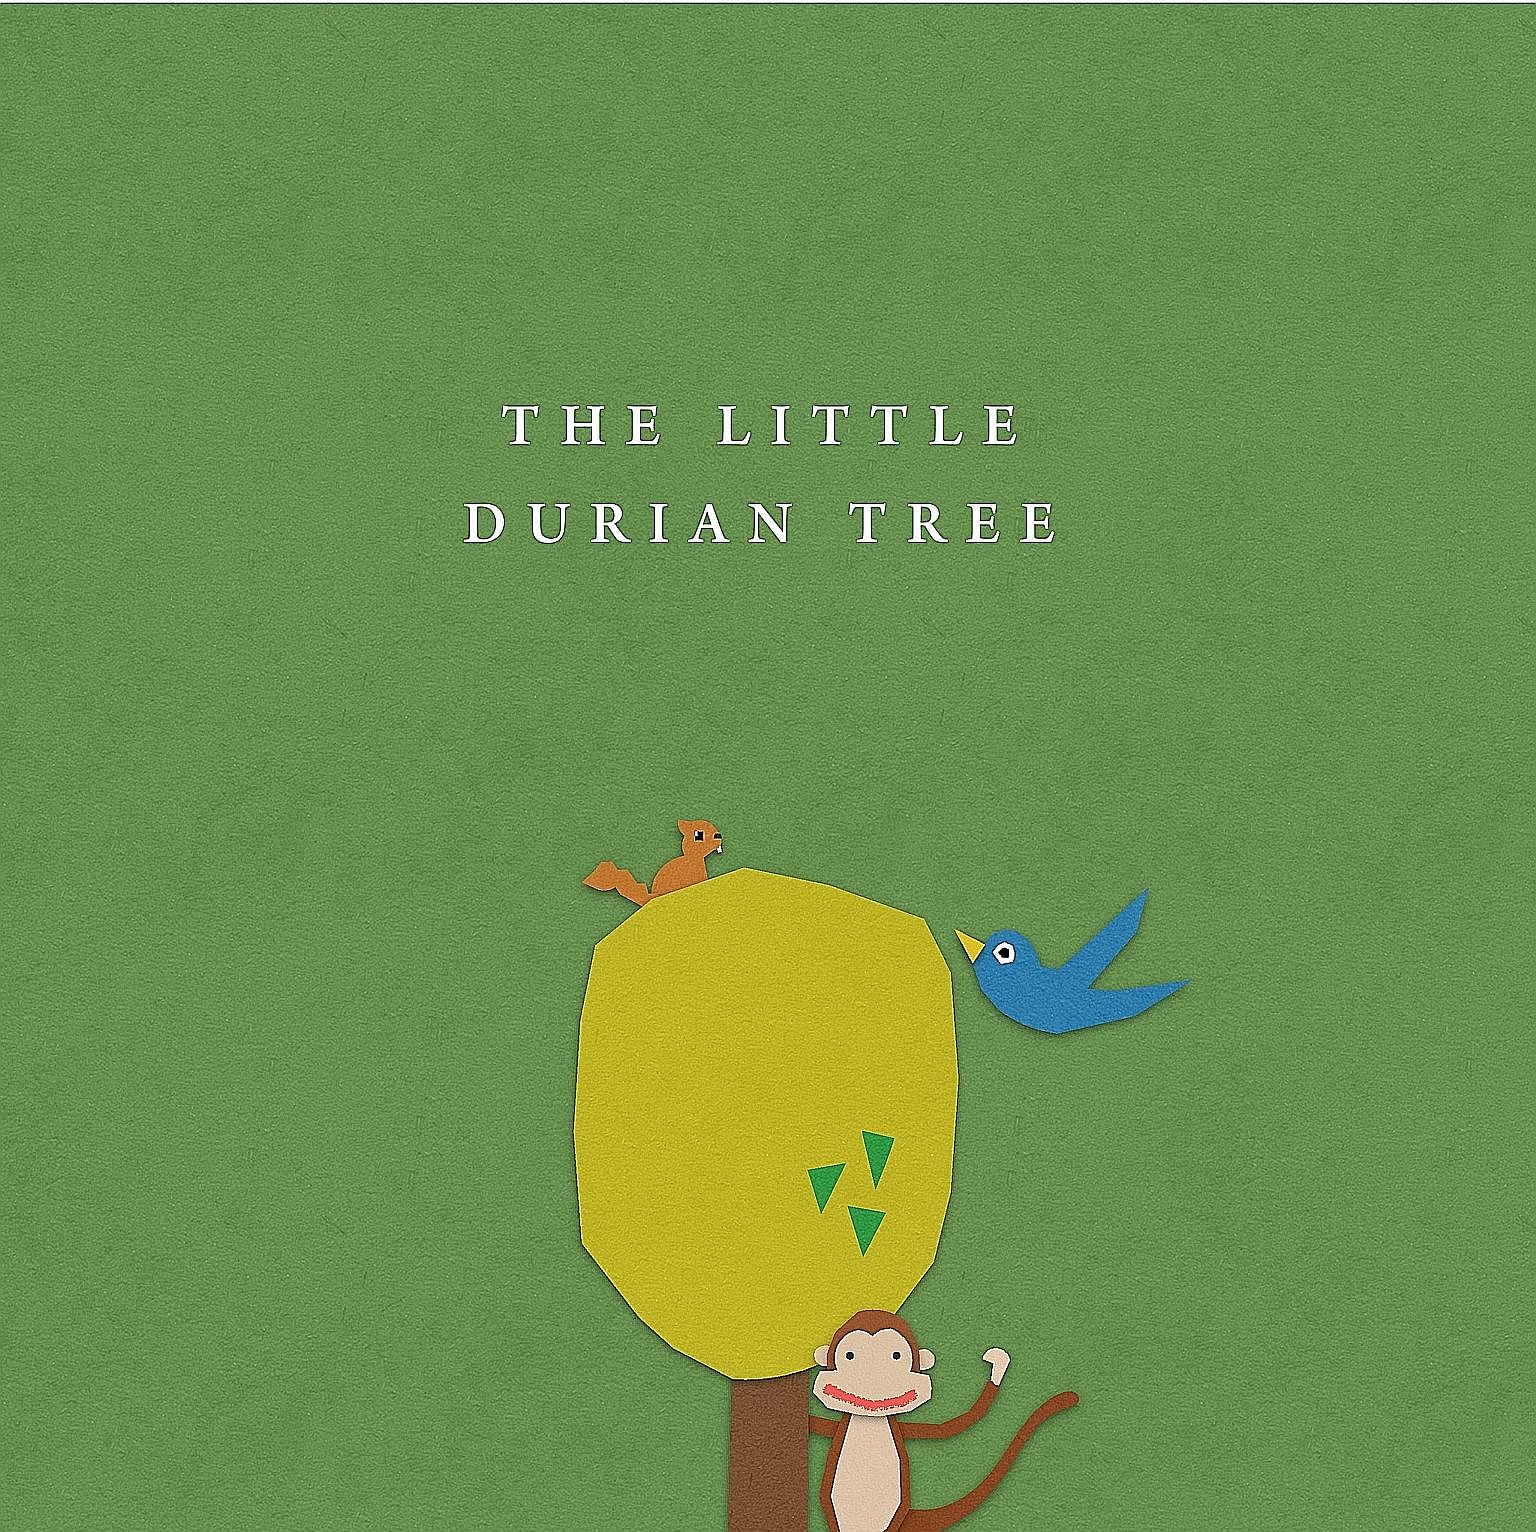 From far left: Students Melodie Edith James, Kylen Ho, and Shona Adisri Menon, all 19, are part of the five-member team that produced The Little Durian Tree (above), winner of the Scholastic Picture Book Award.